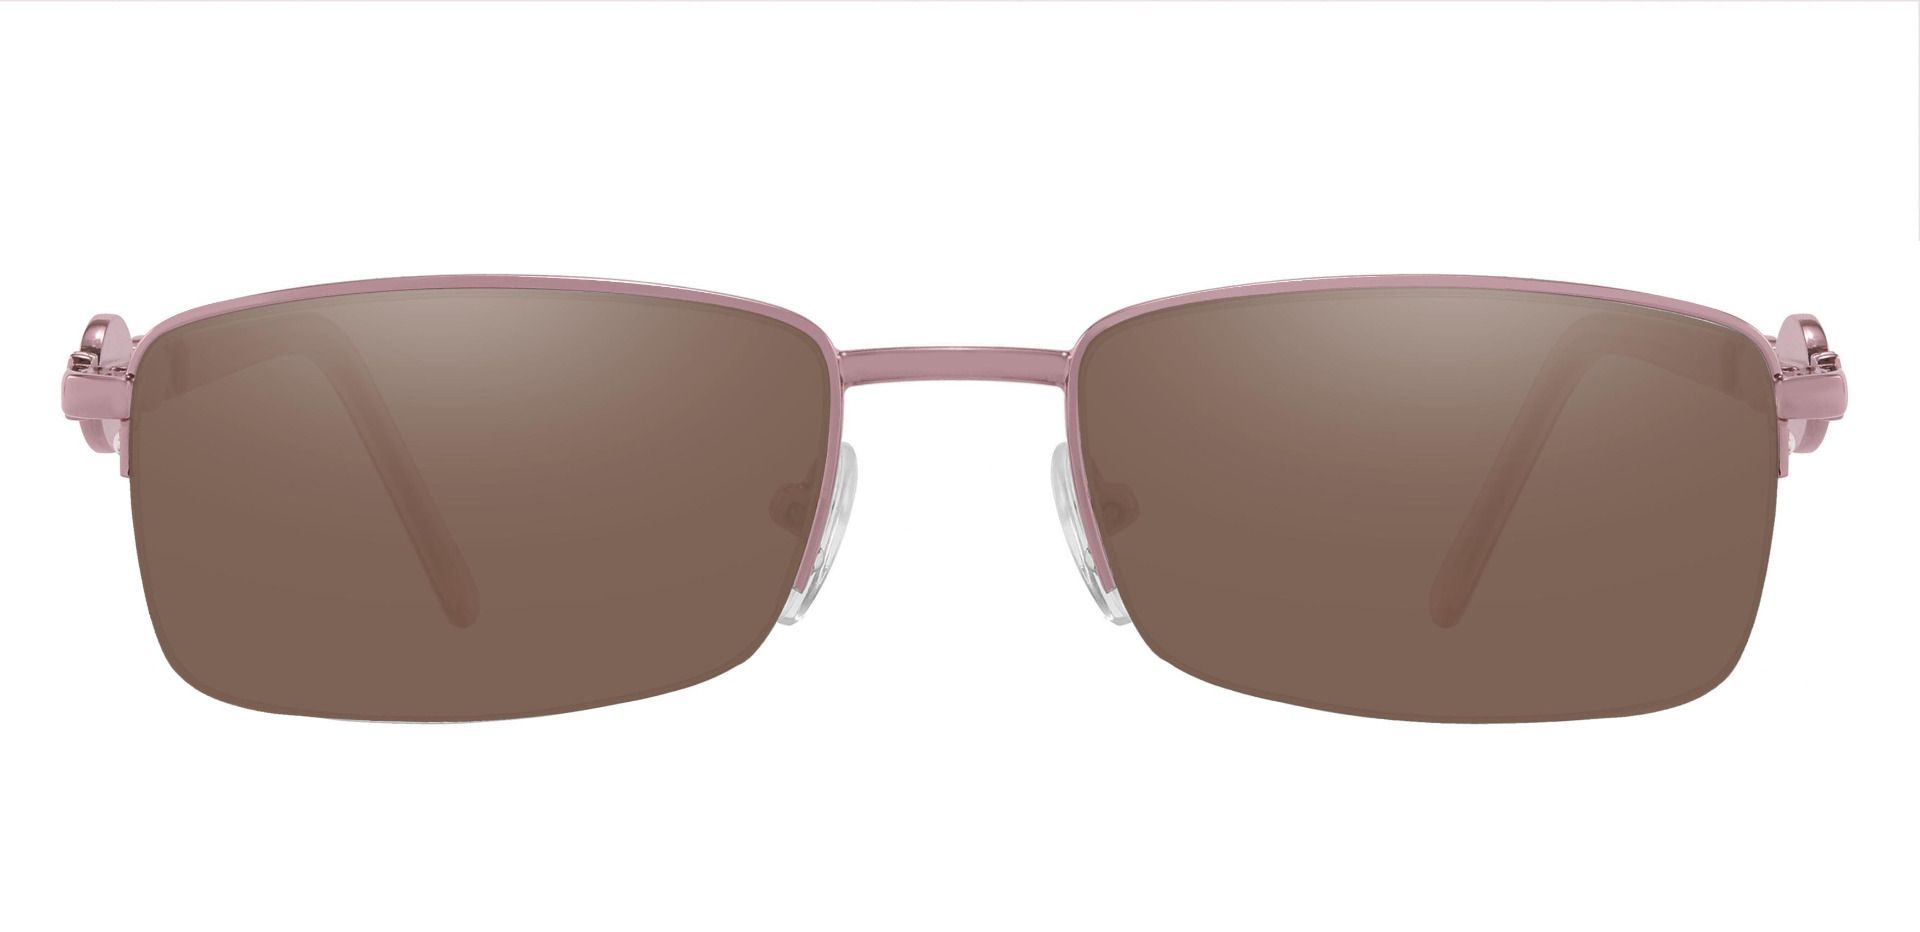 Crowley Rectangle Non-Rx Sunglasses - Pink Frame With Brown Lenses